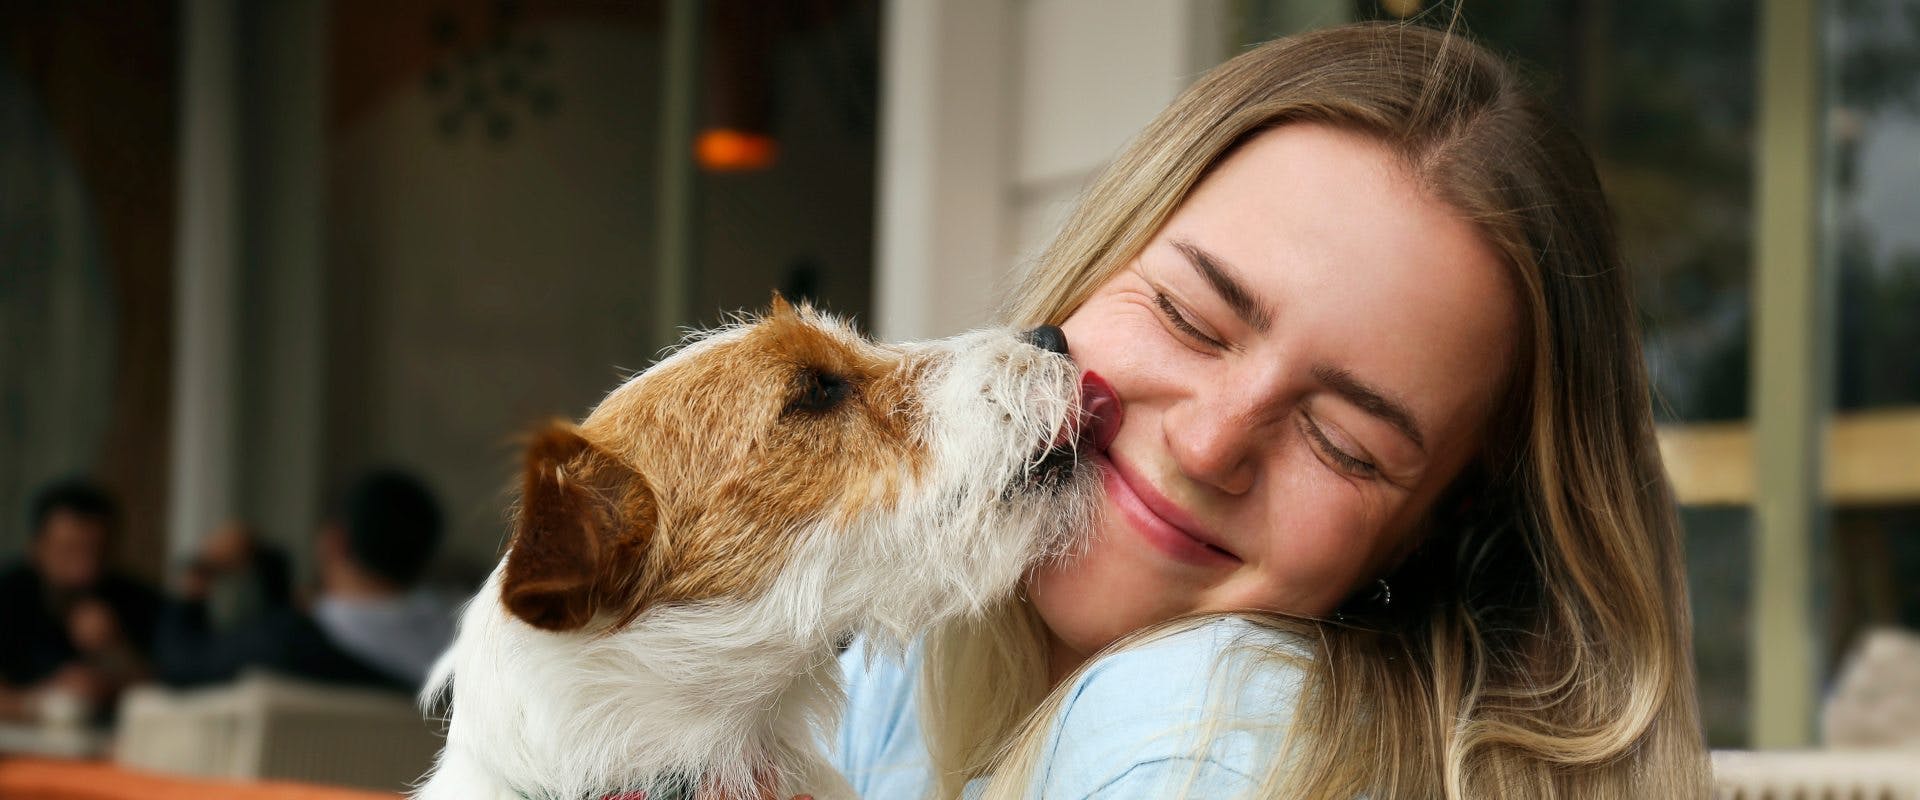 A solo female traveler getting kisses from a dog she is pet sitting in Berlin.